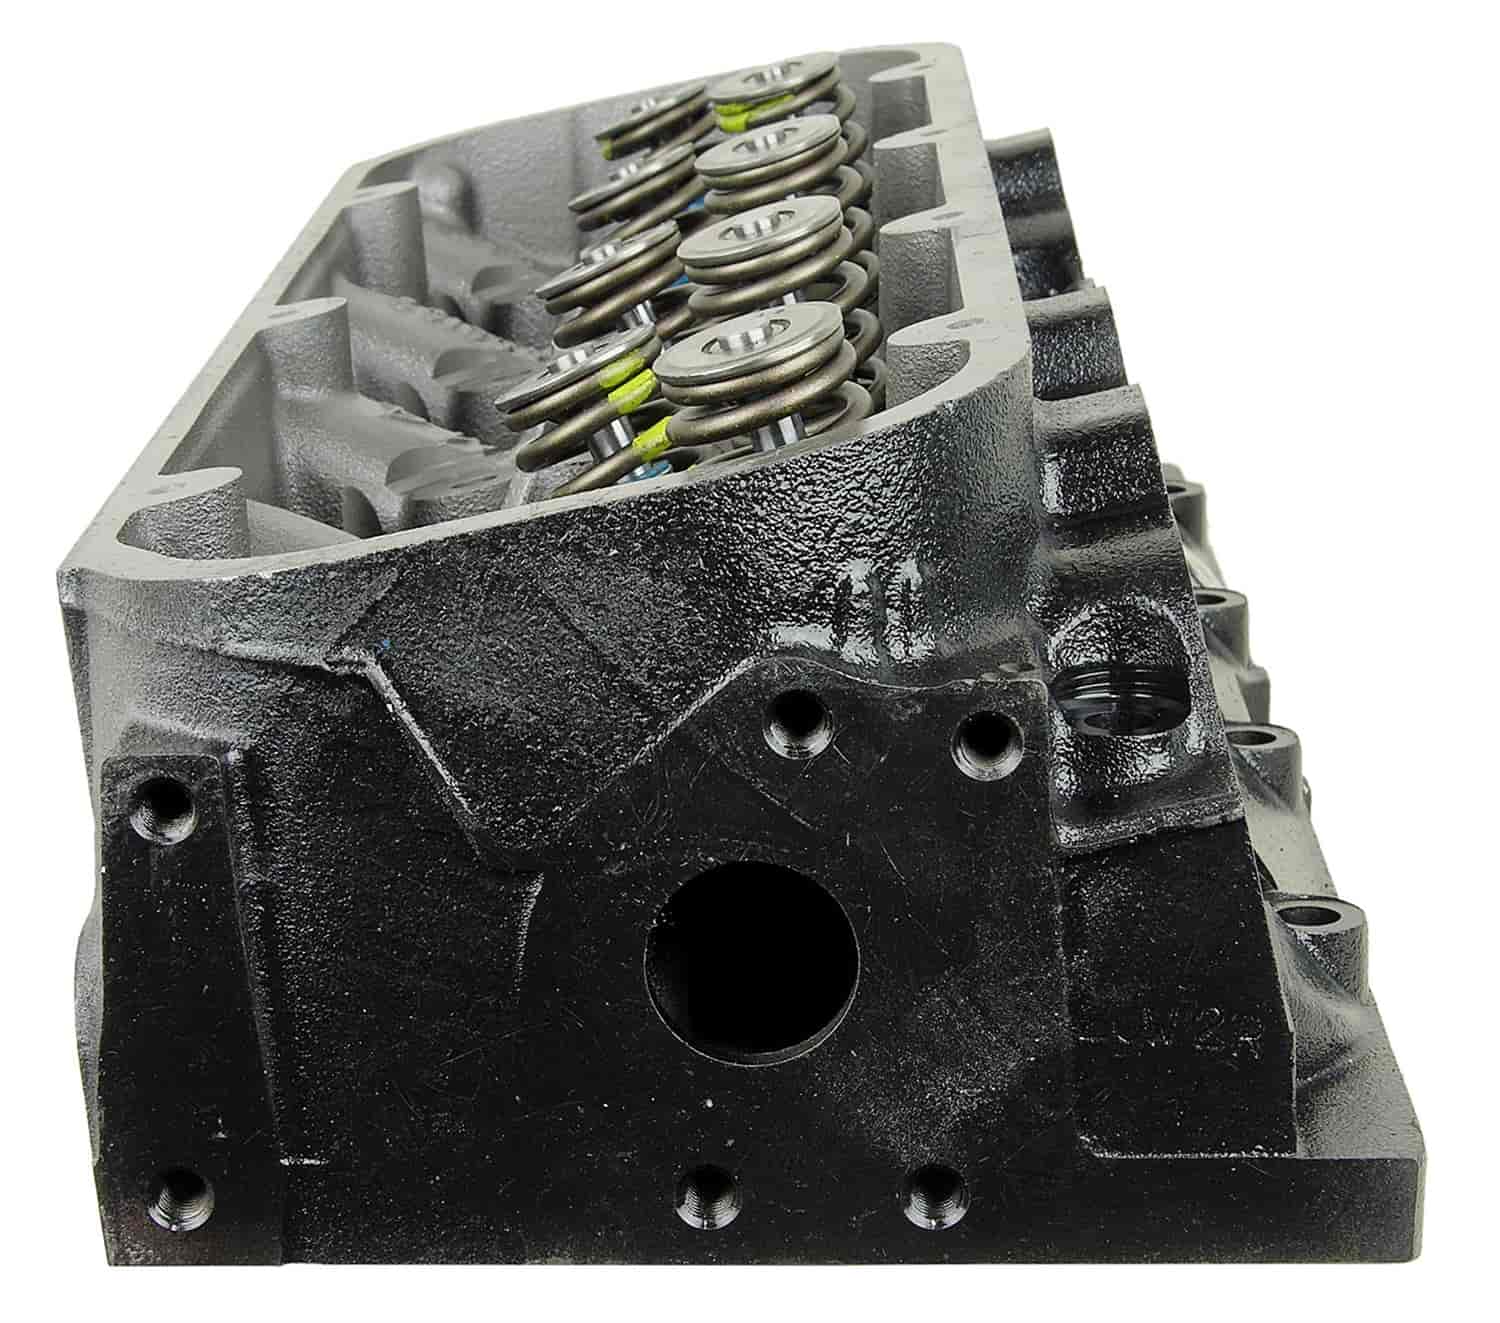 Remanufactured Cylinder Head for 2001-2009 Chevy/GMC Truck, SUV, & Van with CNG 496ci/8.1L V8